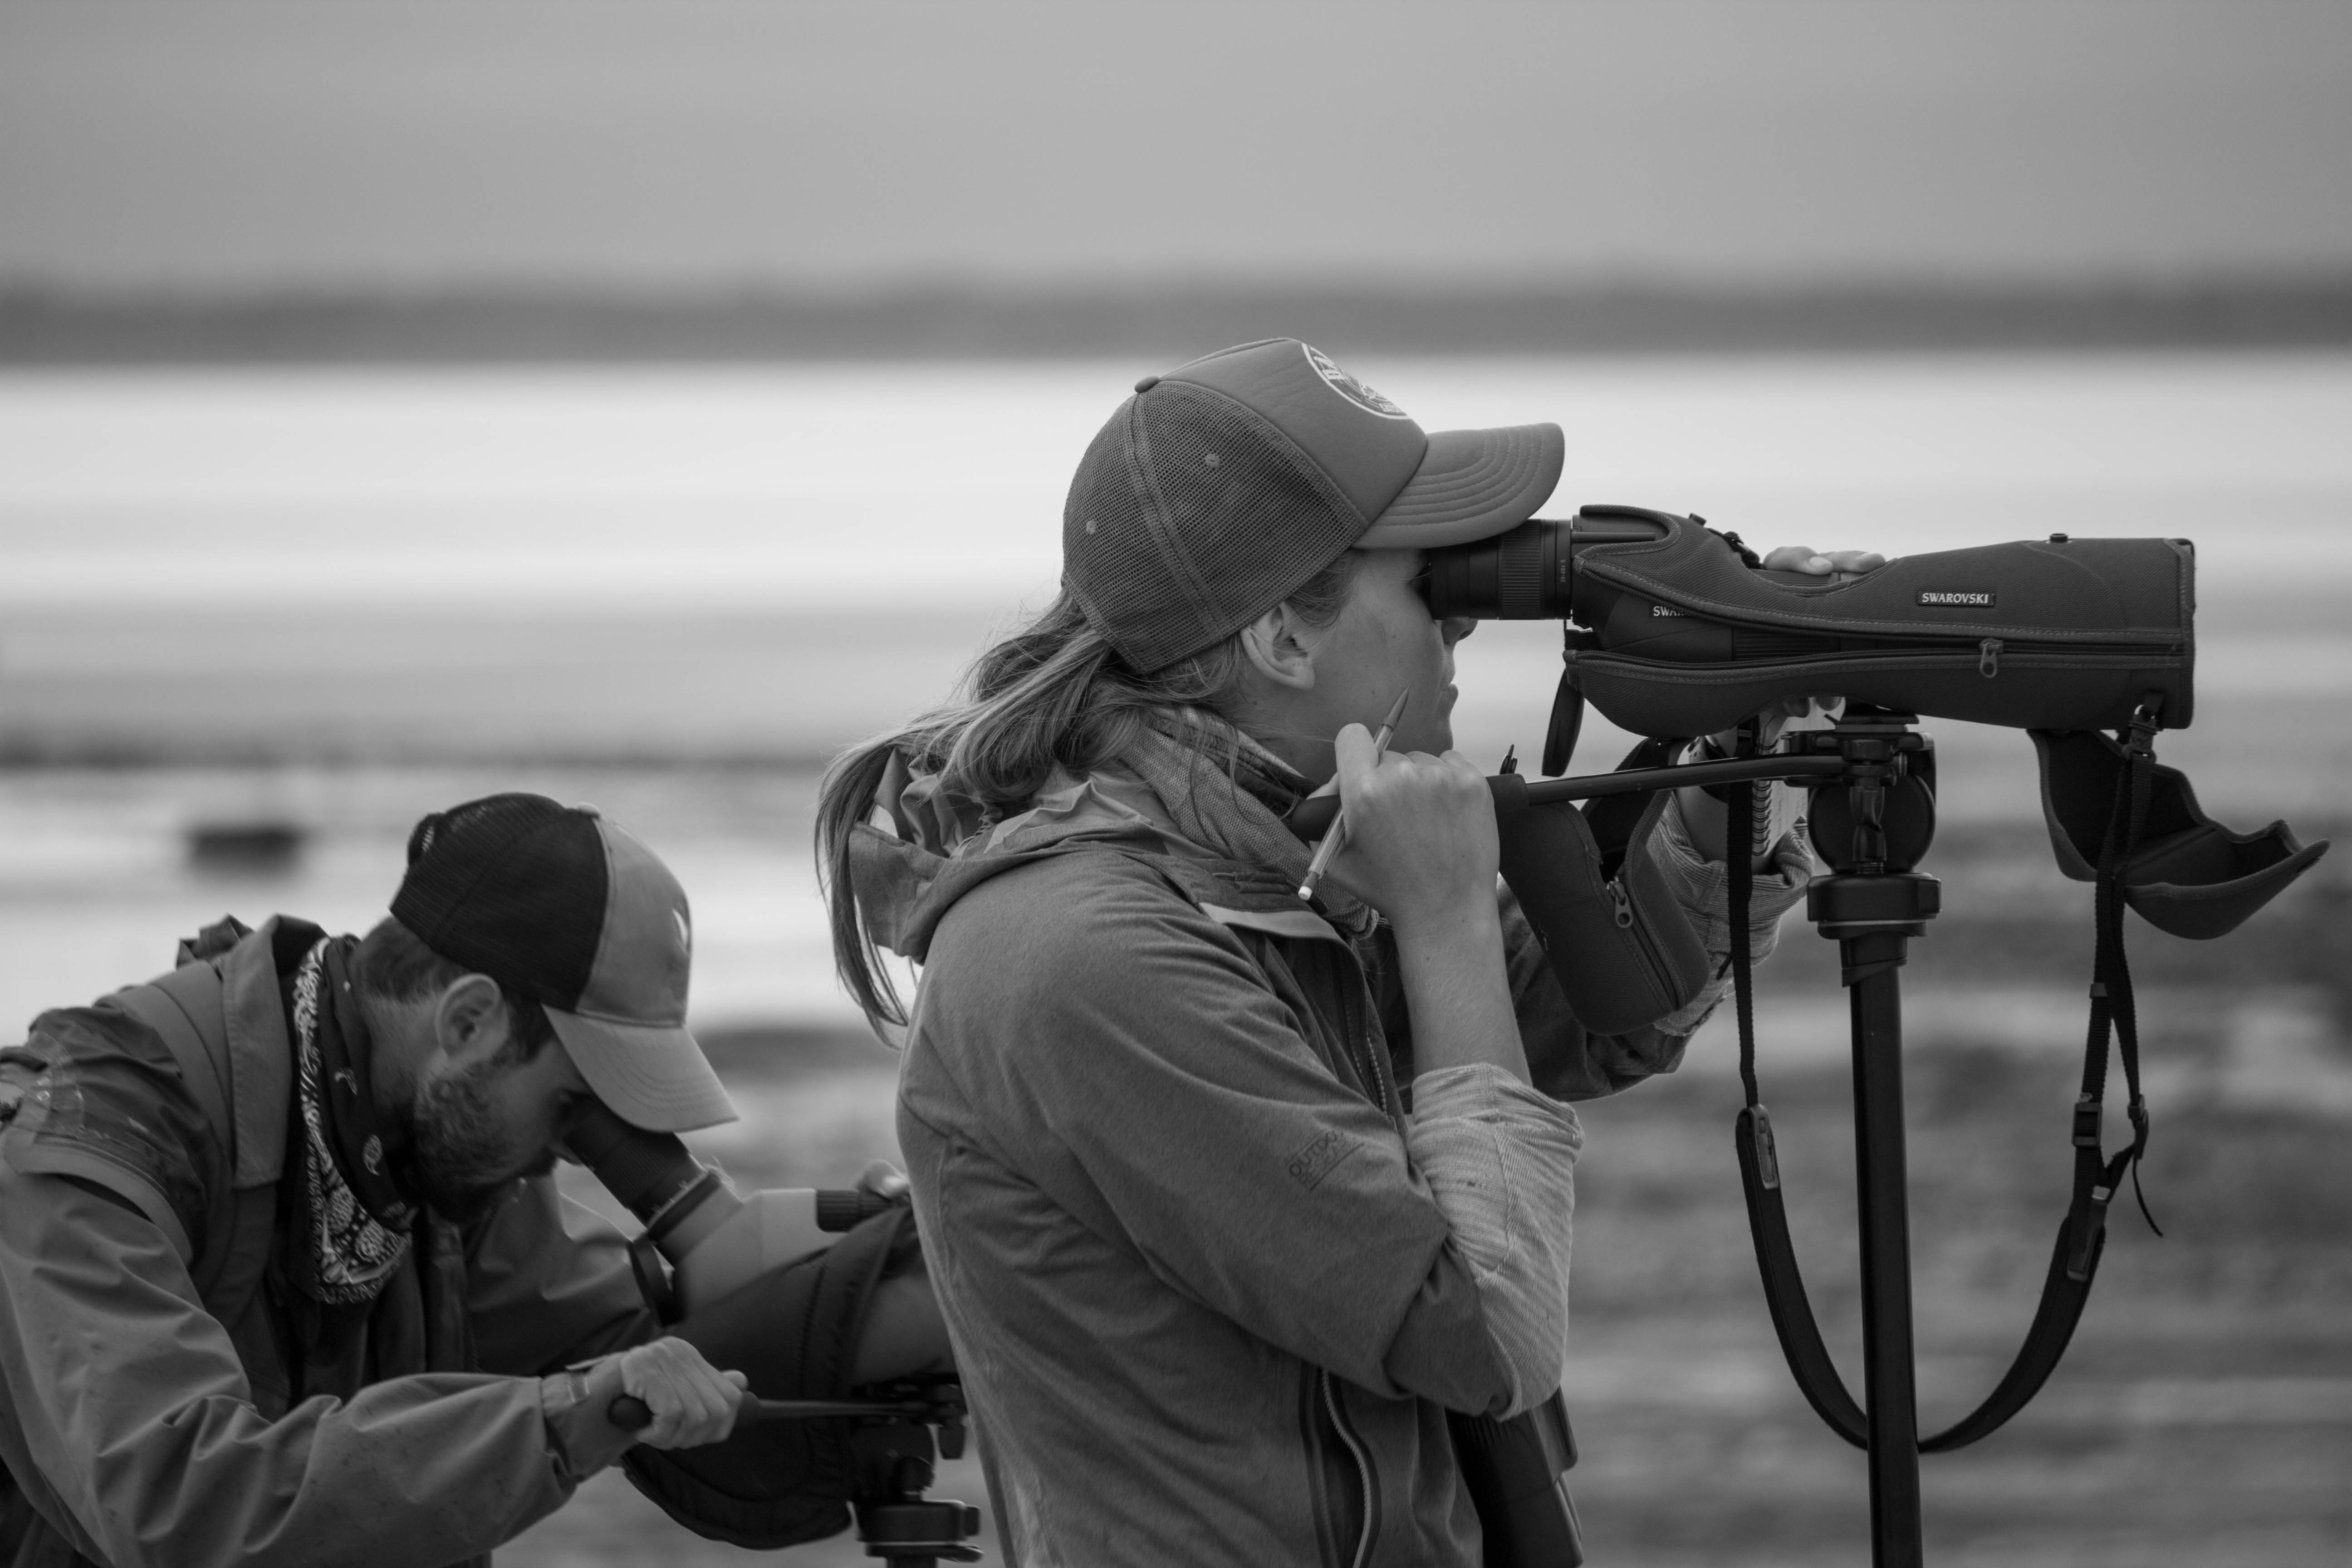 Just another day at the office. Field techs hard at work identifying shorebirds with the help of their scopes.